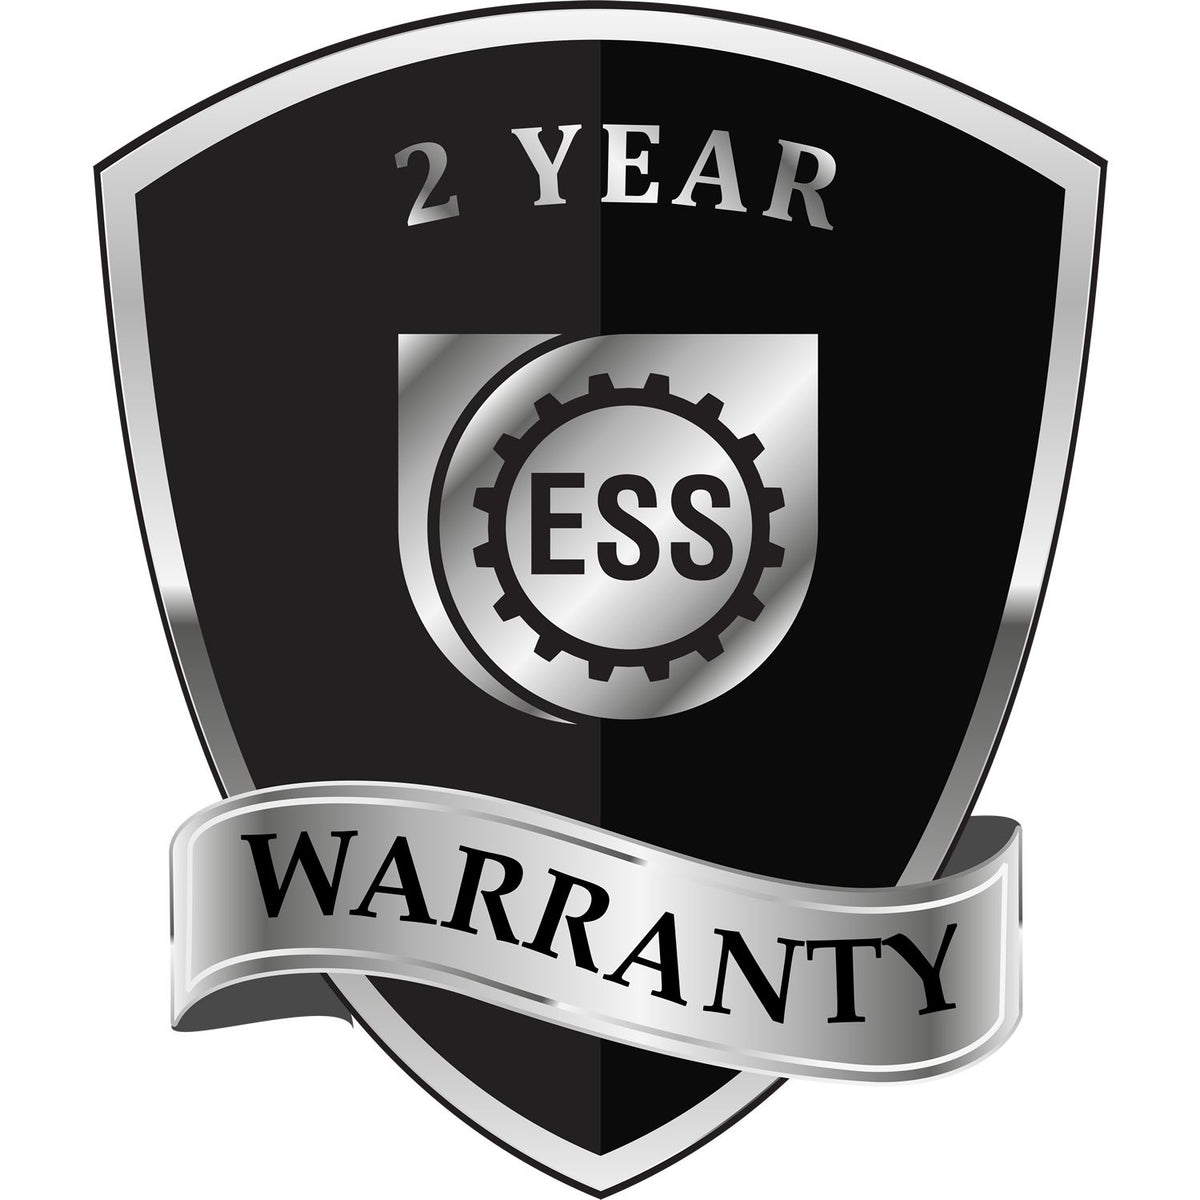 A badge or emblem showing a warranty icon for the Heavy Duty Cast Iron Arizona Land Surveyor Seal Embosser